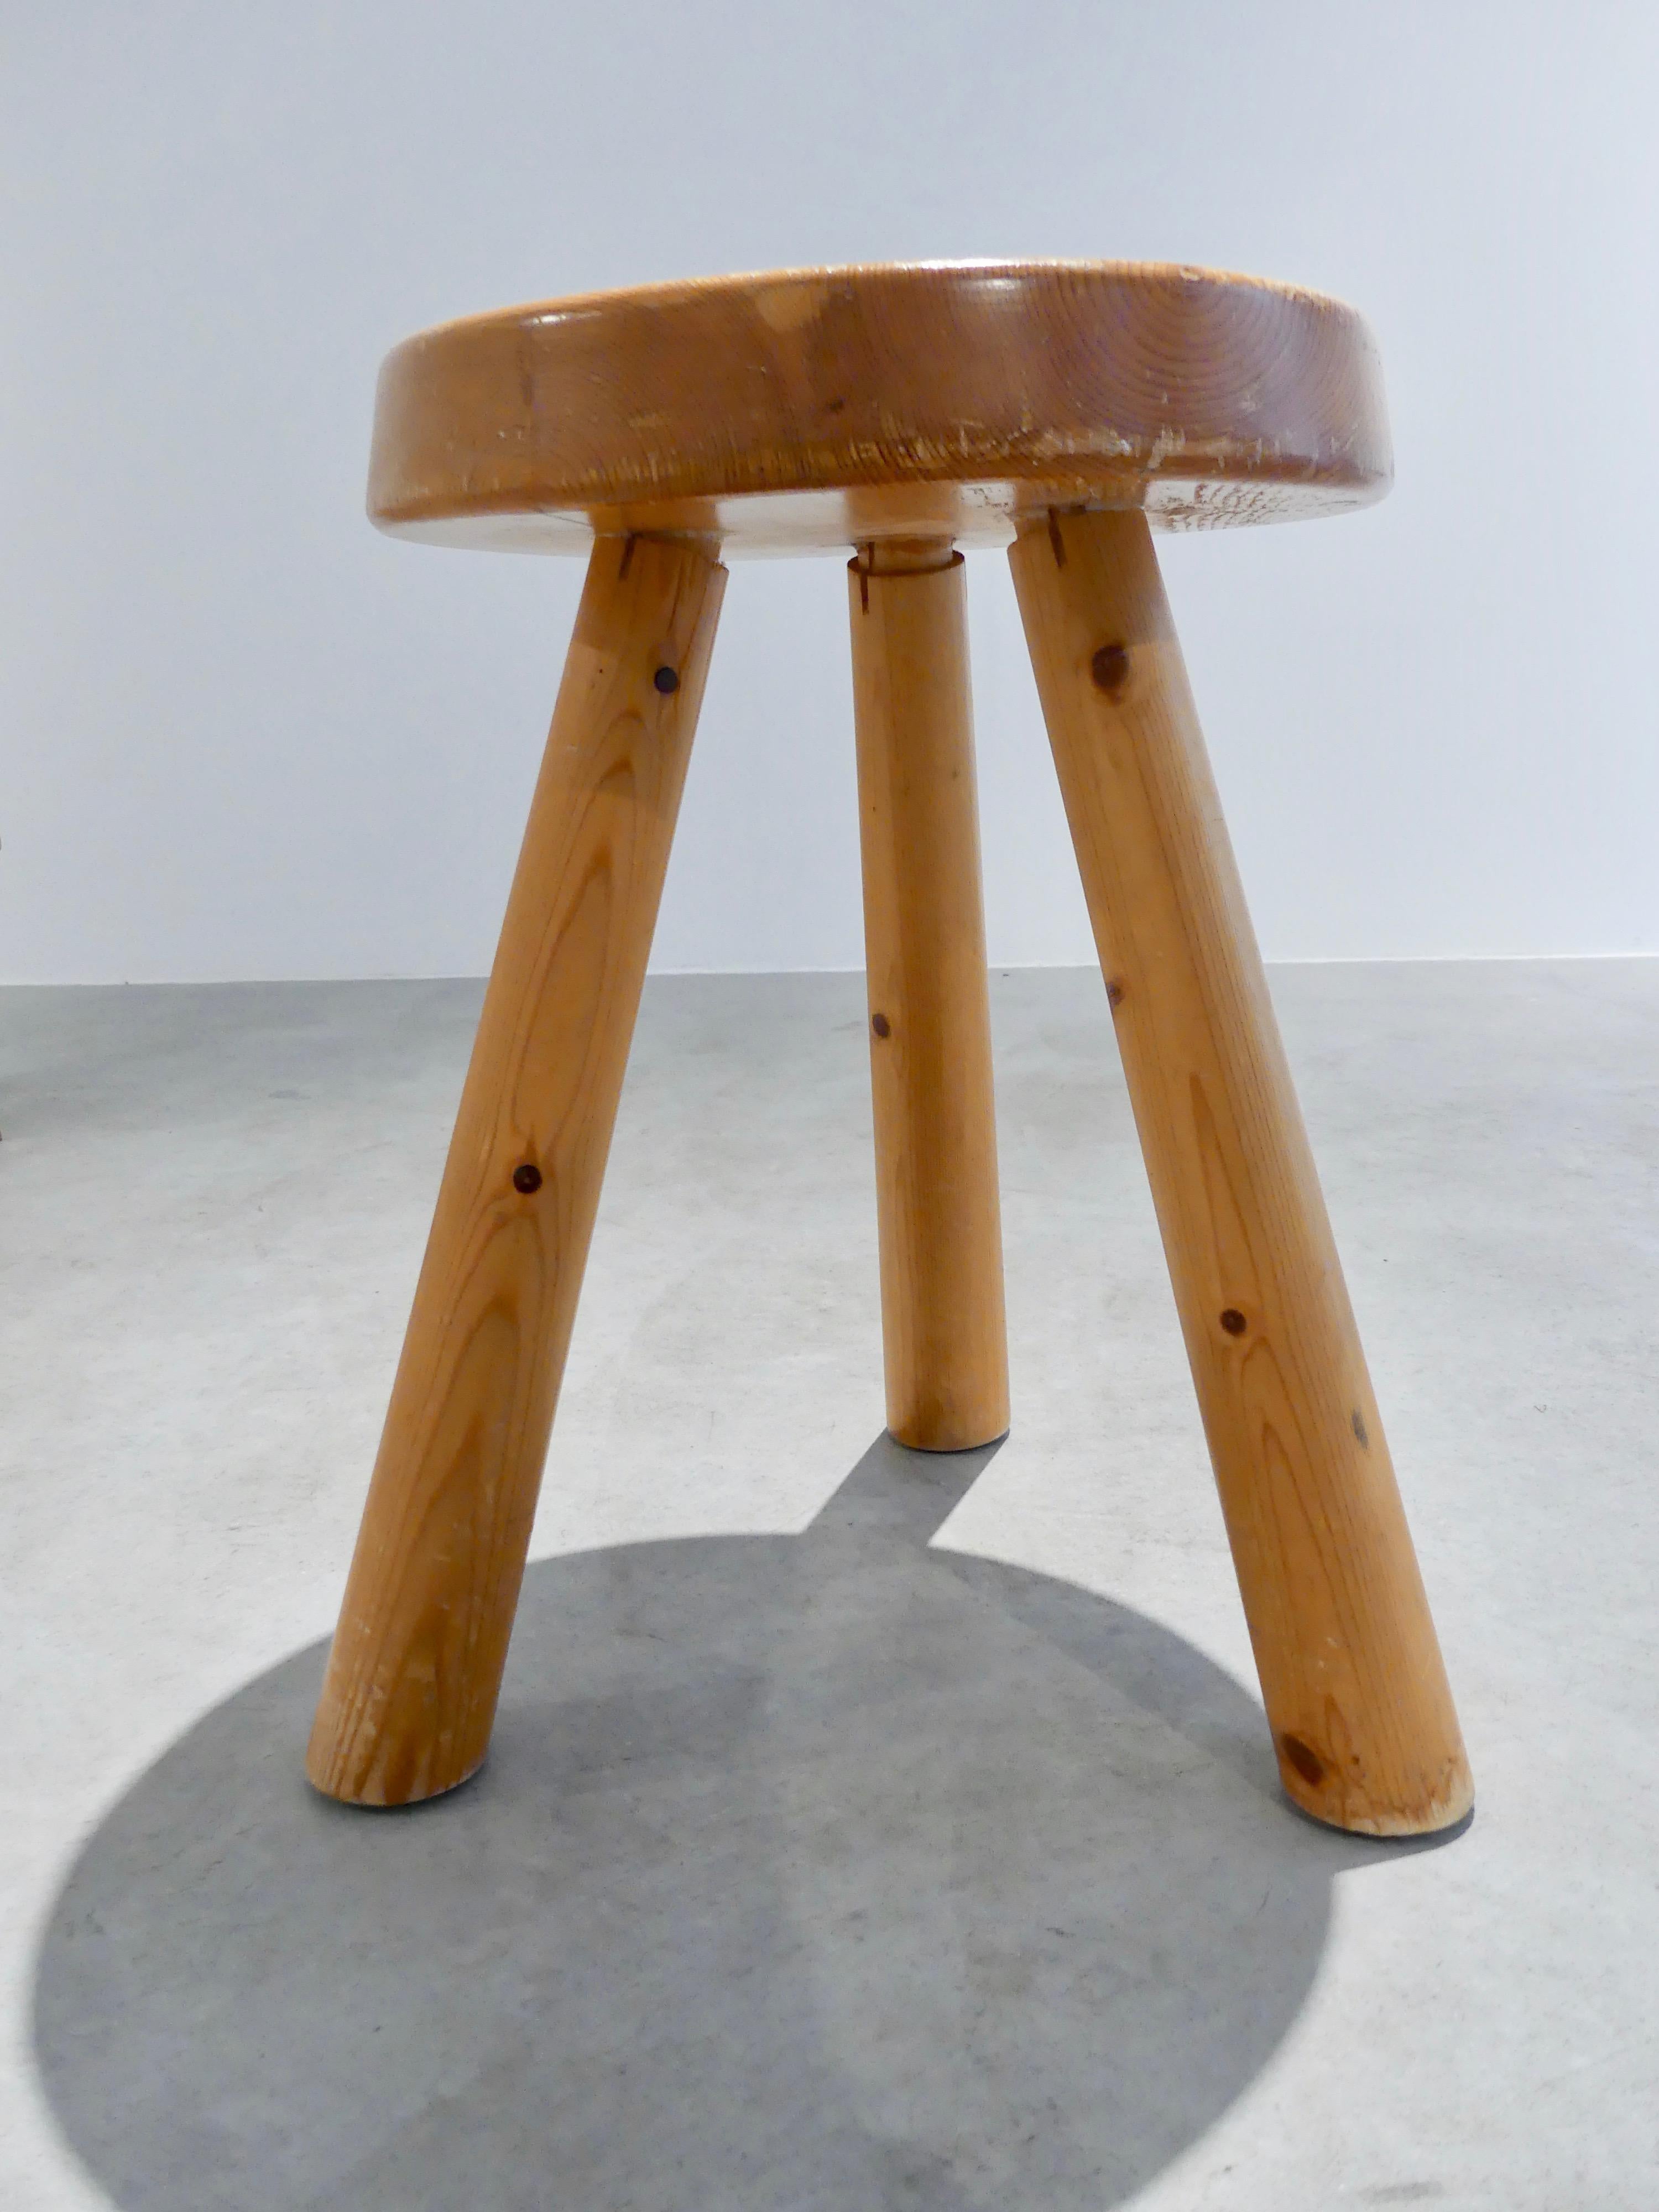 Tripod stools, made of pinewood, from the 1950s.
Charlotte Perriand from Les Arcs

Several stools in stock.